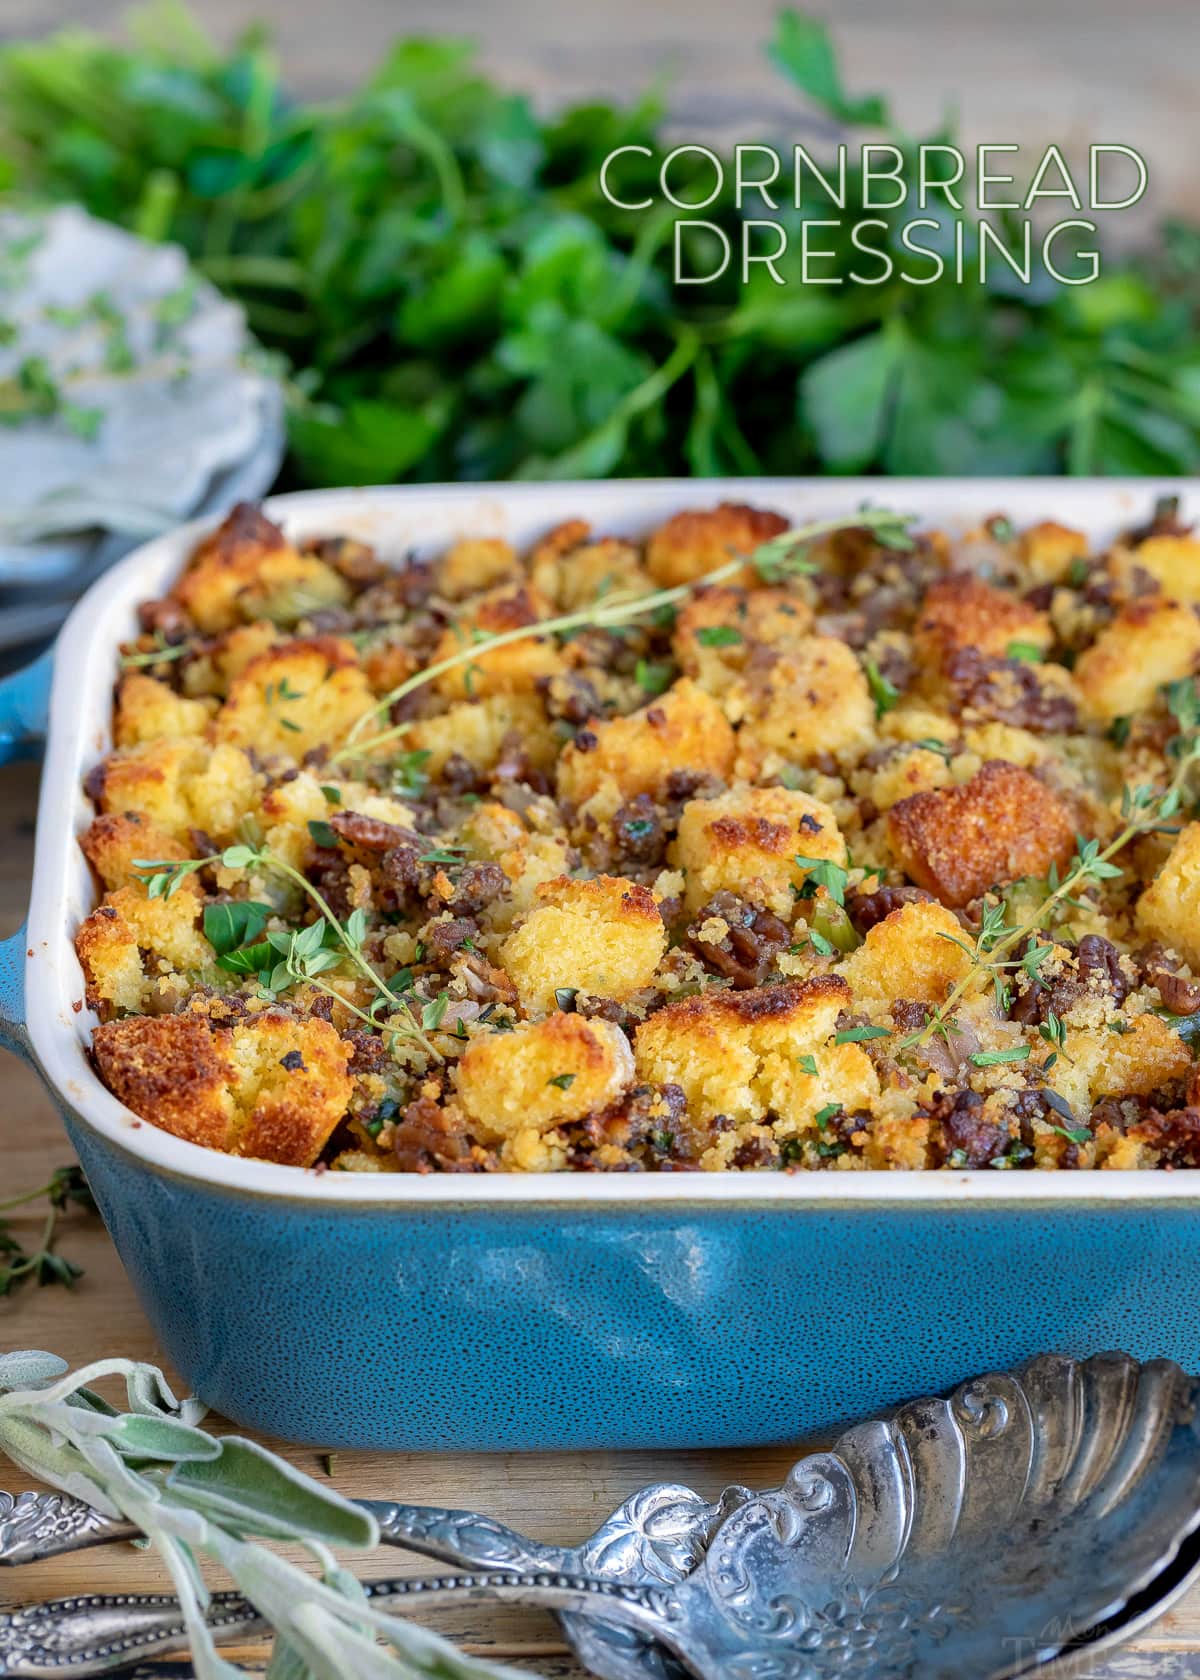 cornbread dressing in casserole dish with fresh herbs scattered on top and title overlay at top of image